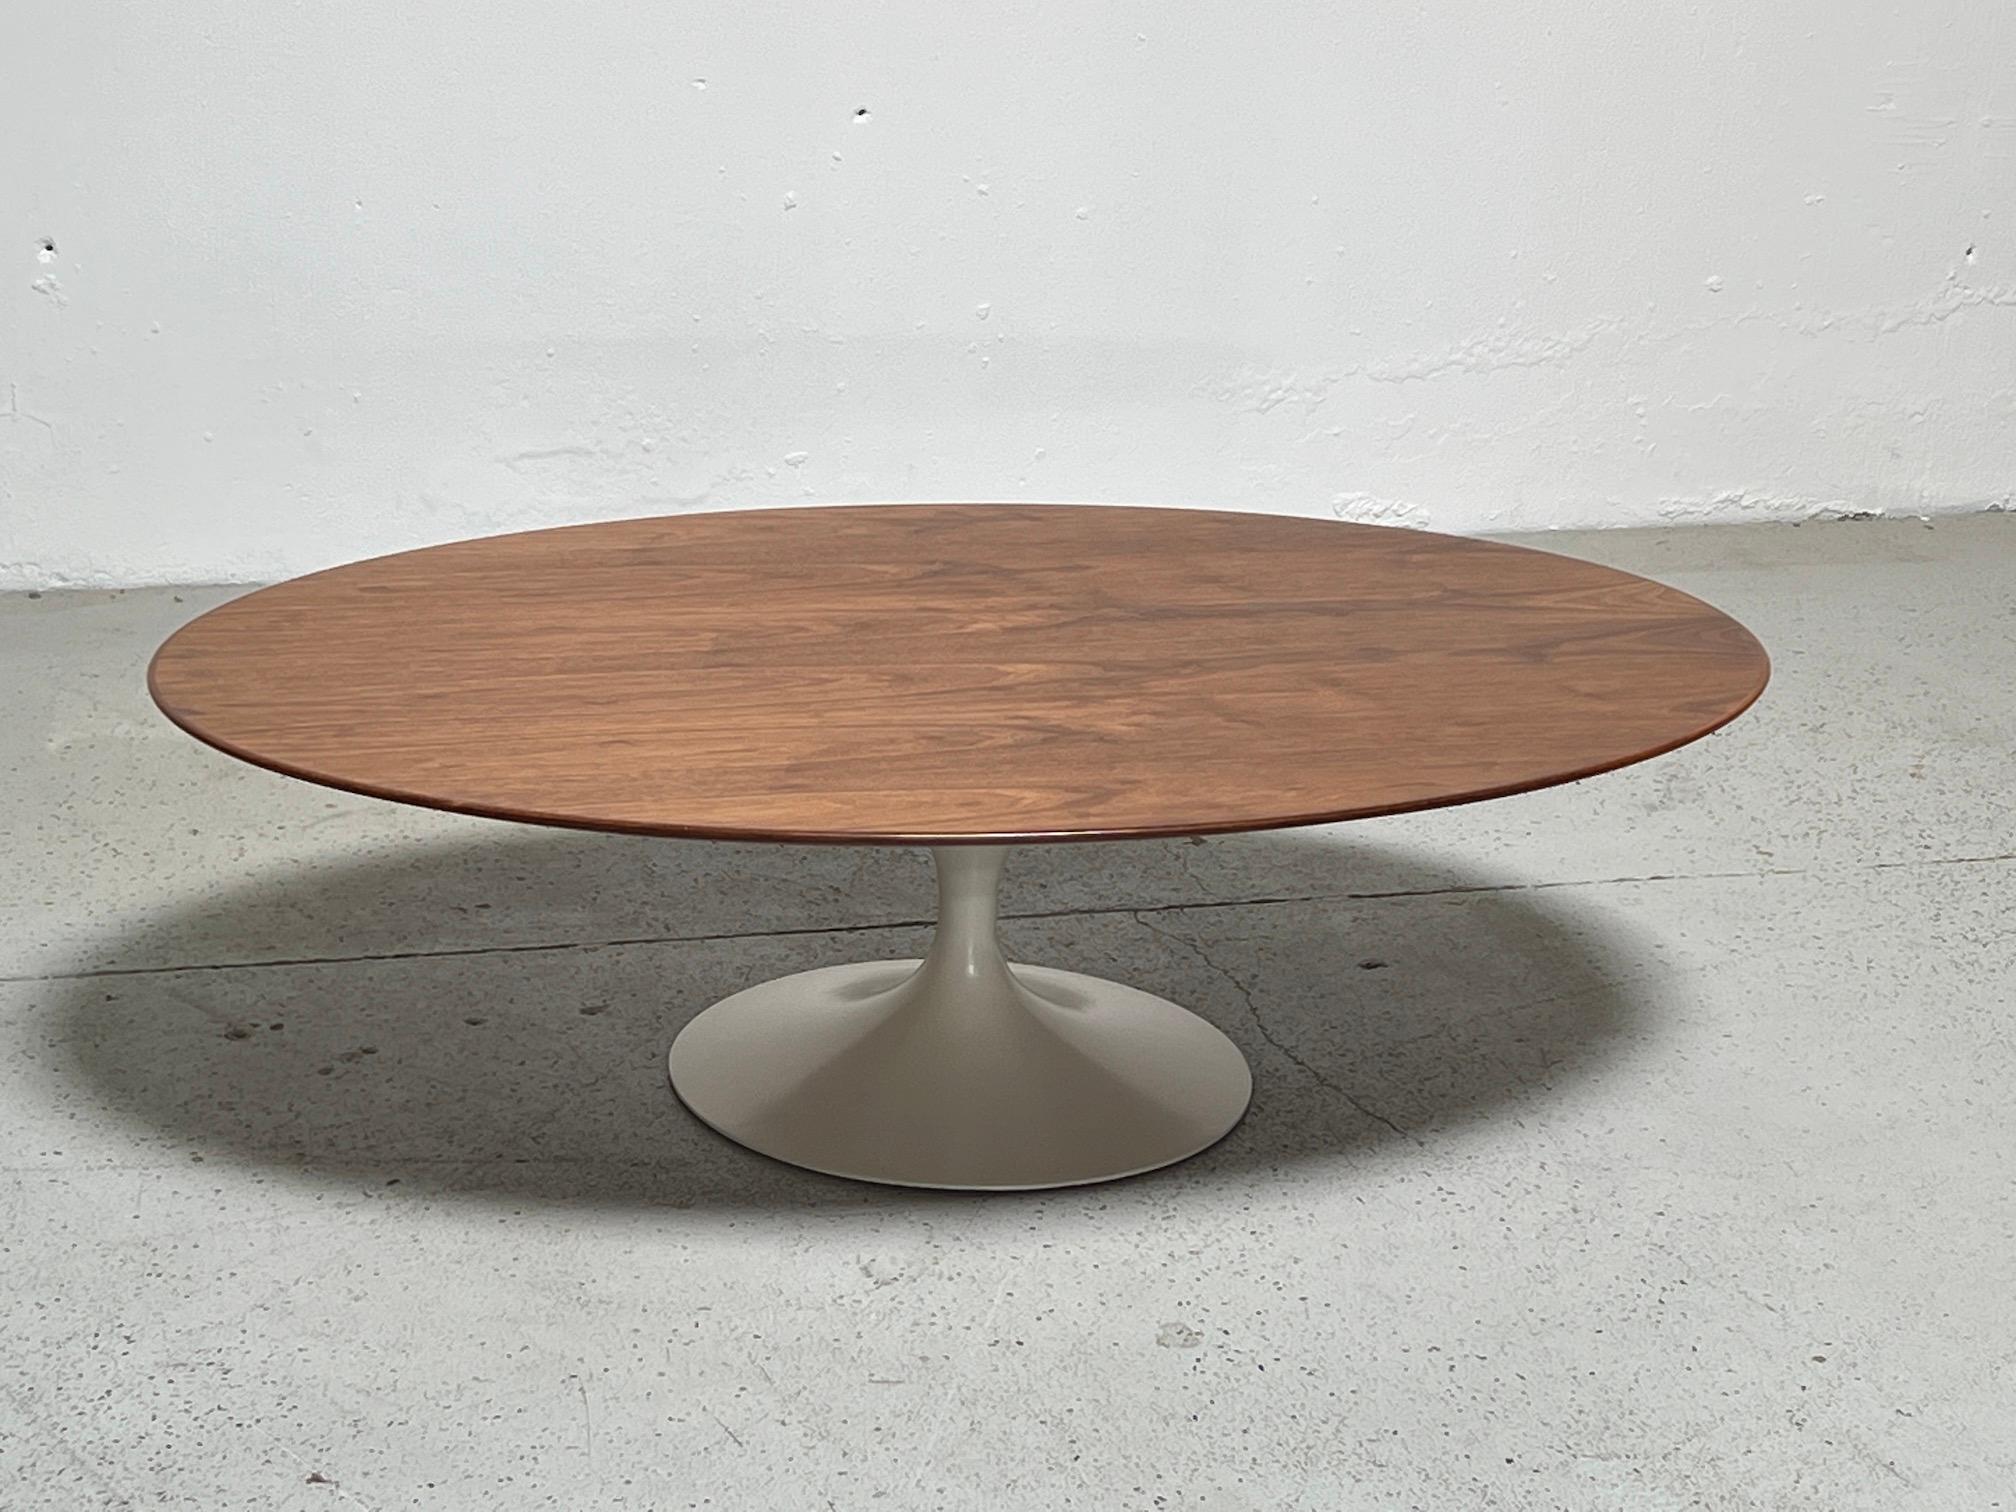 Walnut Top Elliptical Coffee Table by Eero Saarinen for Knoll In Good Condition For Sale In Dallas, TX